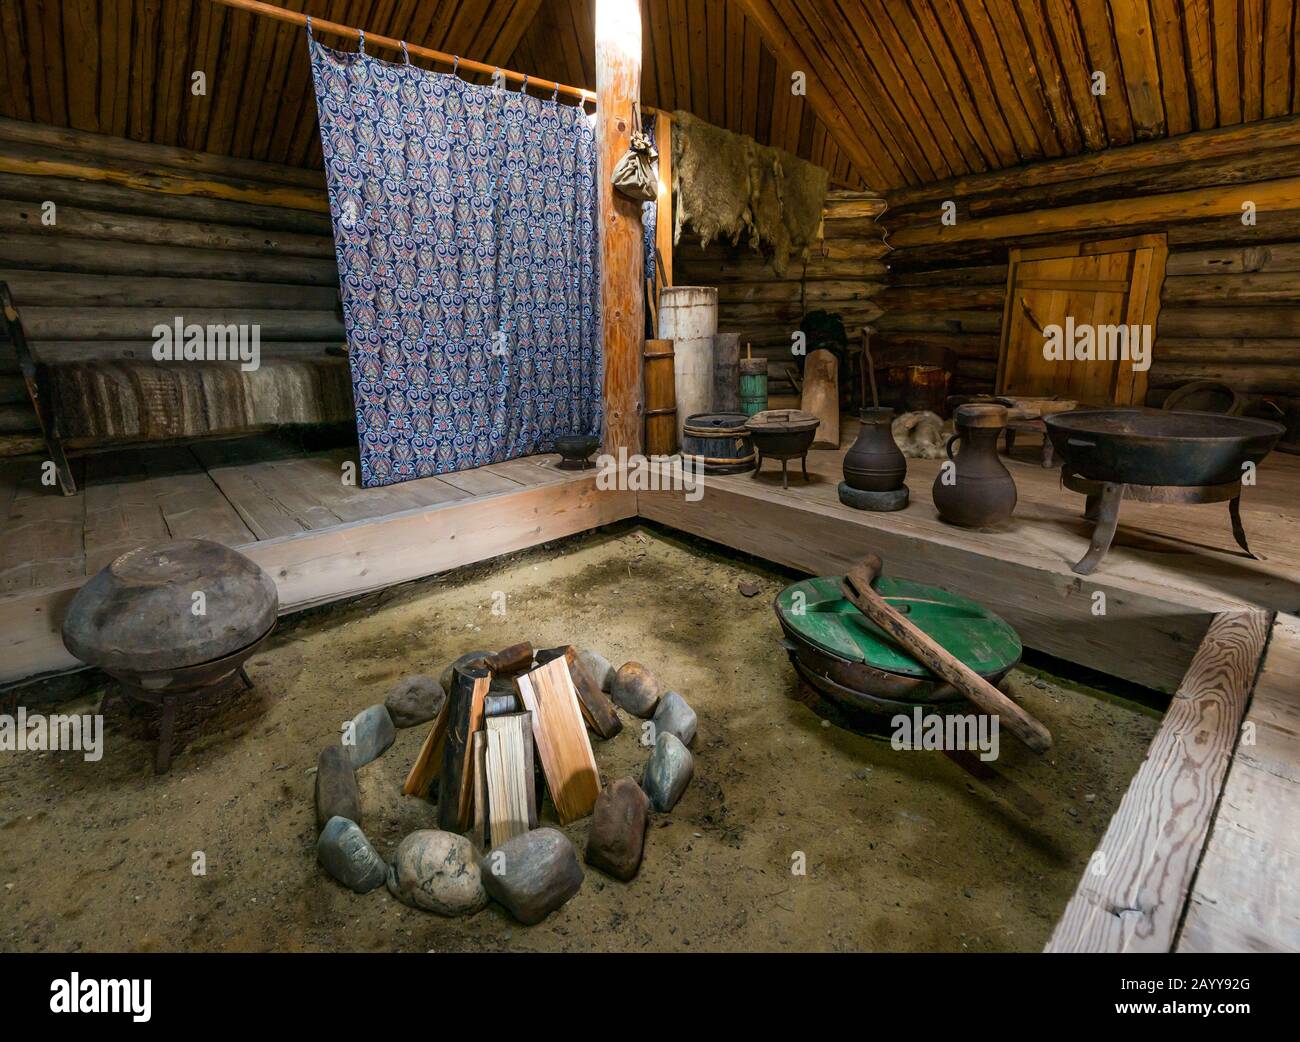 Primitive house log cabin interior depicting traditional way of life, Taltsy Museum of Wooden Architecture, Irkutsk Region, Siberia, Russia Stock Photo